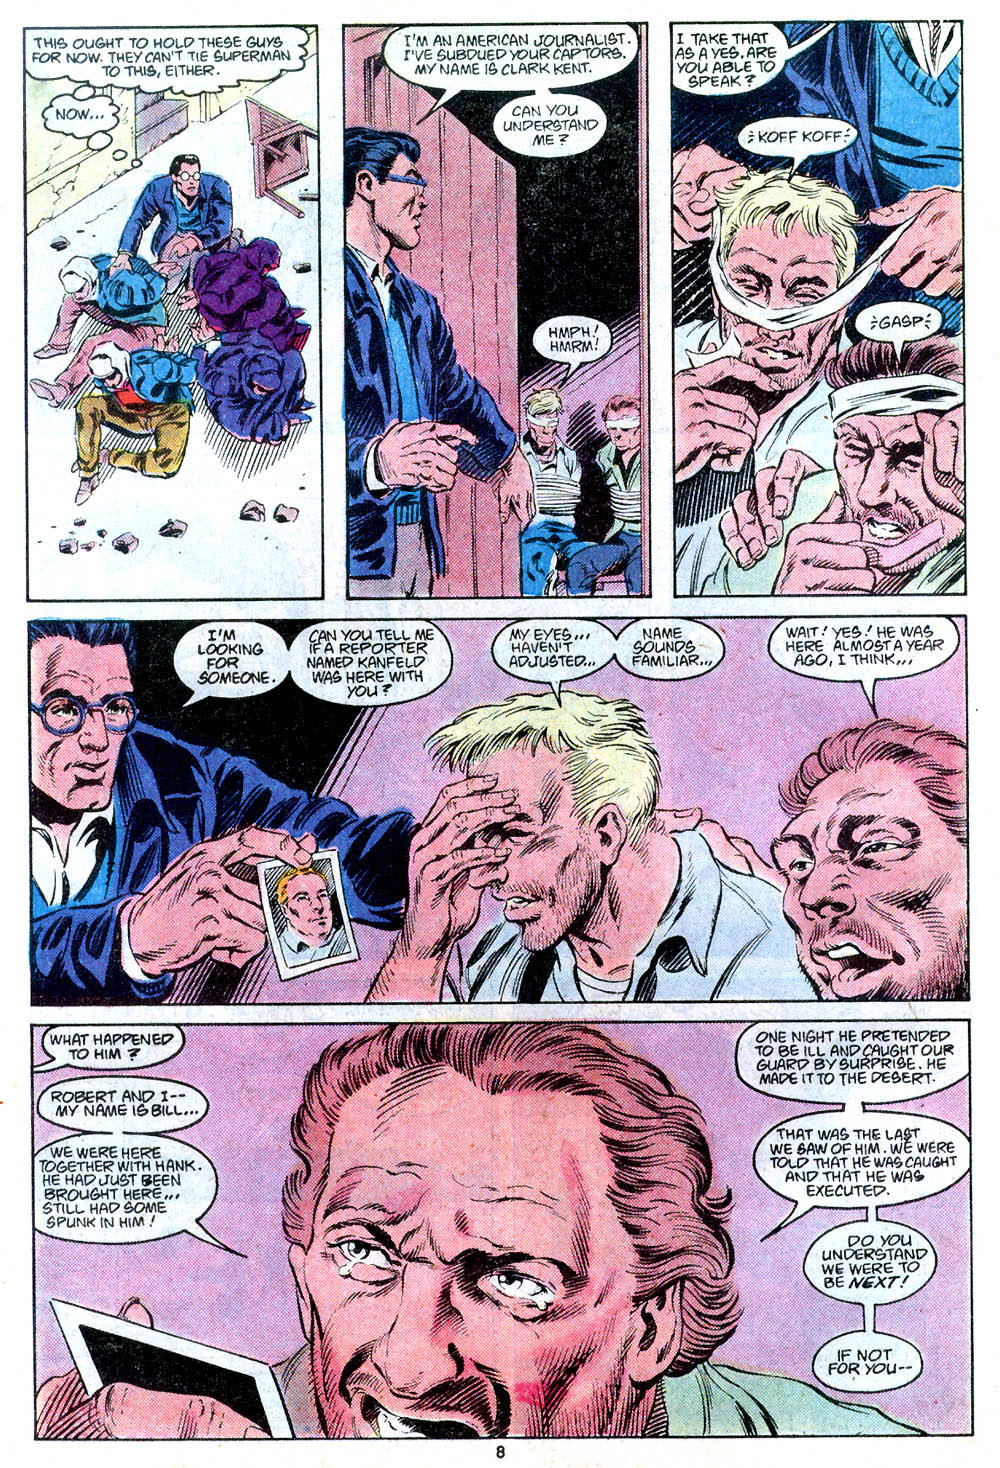 Adventures of Superman (1987) 443 Page 8